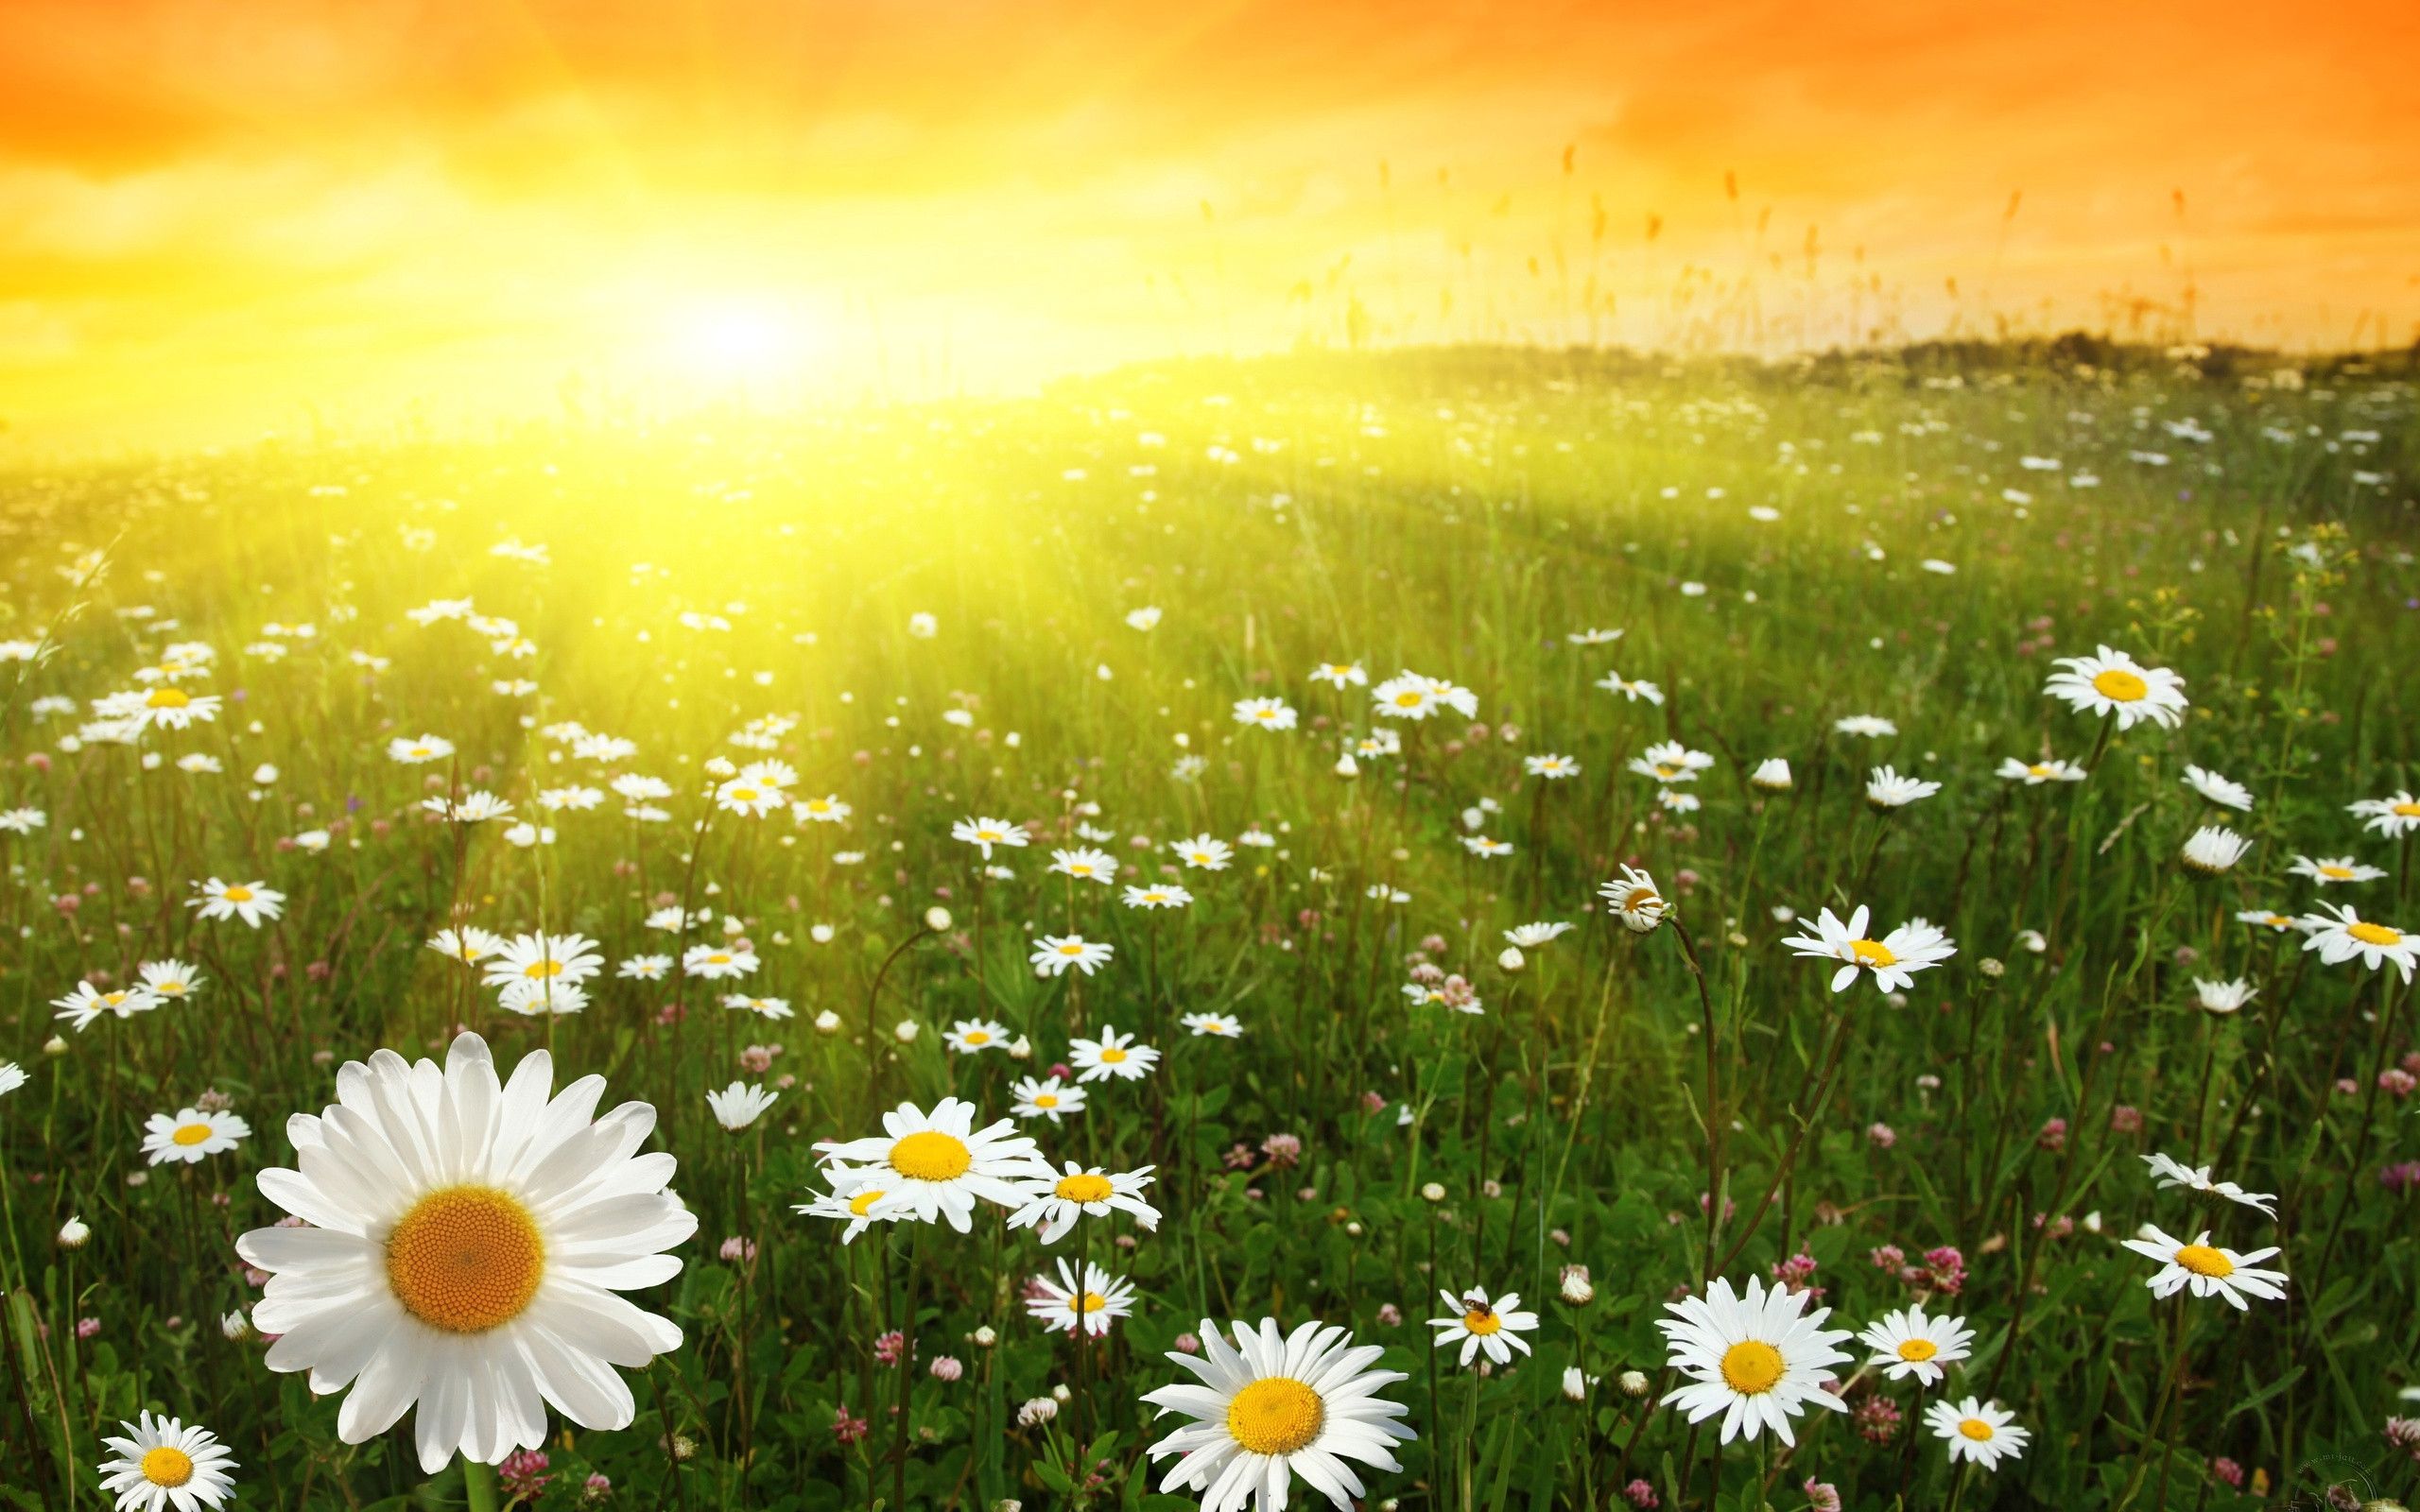 HD Sunny Bright Day Wallpapers, Live Sunny Bright Day Wallpapers ...